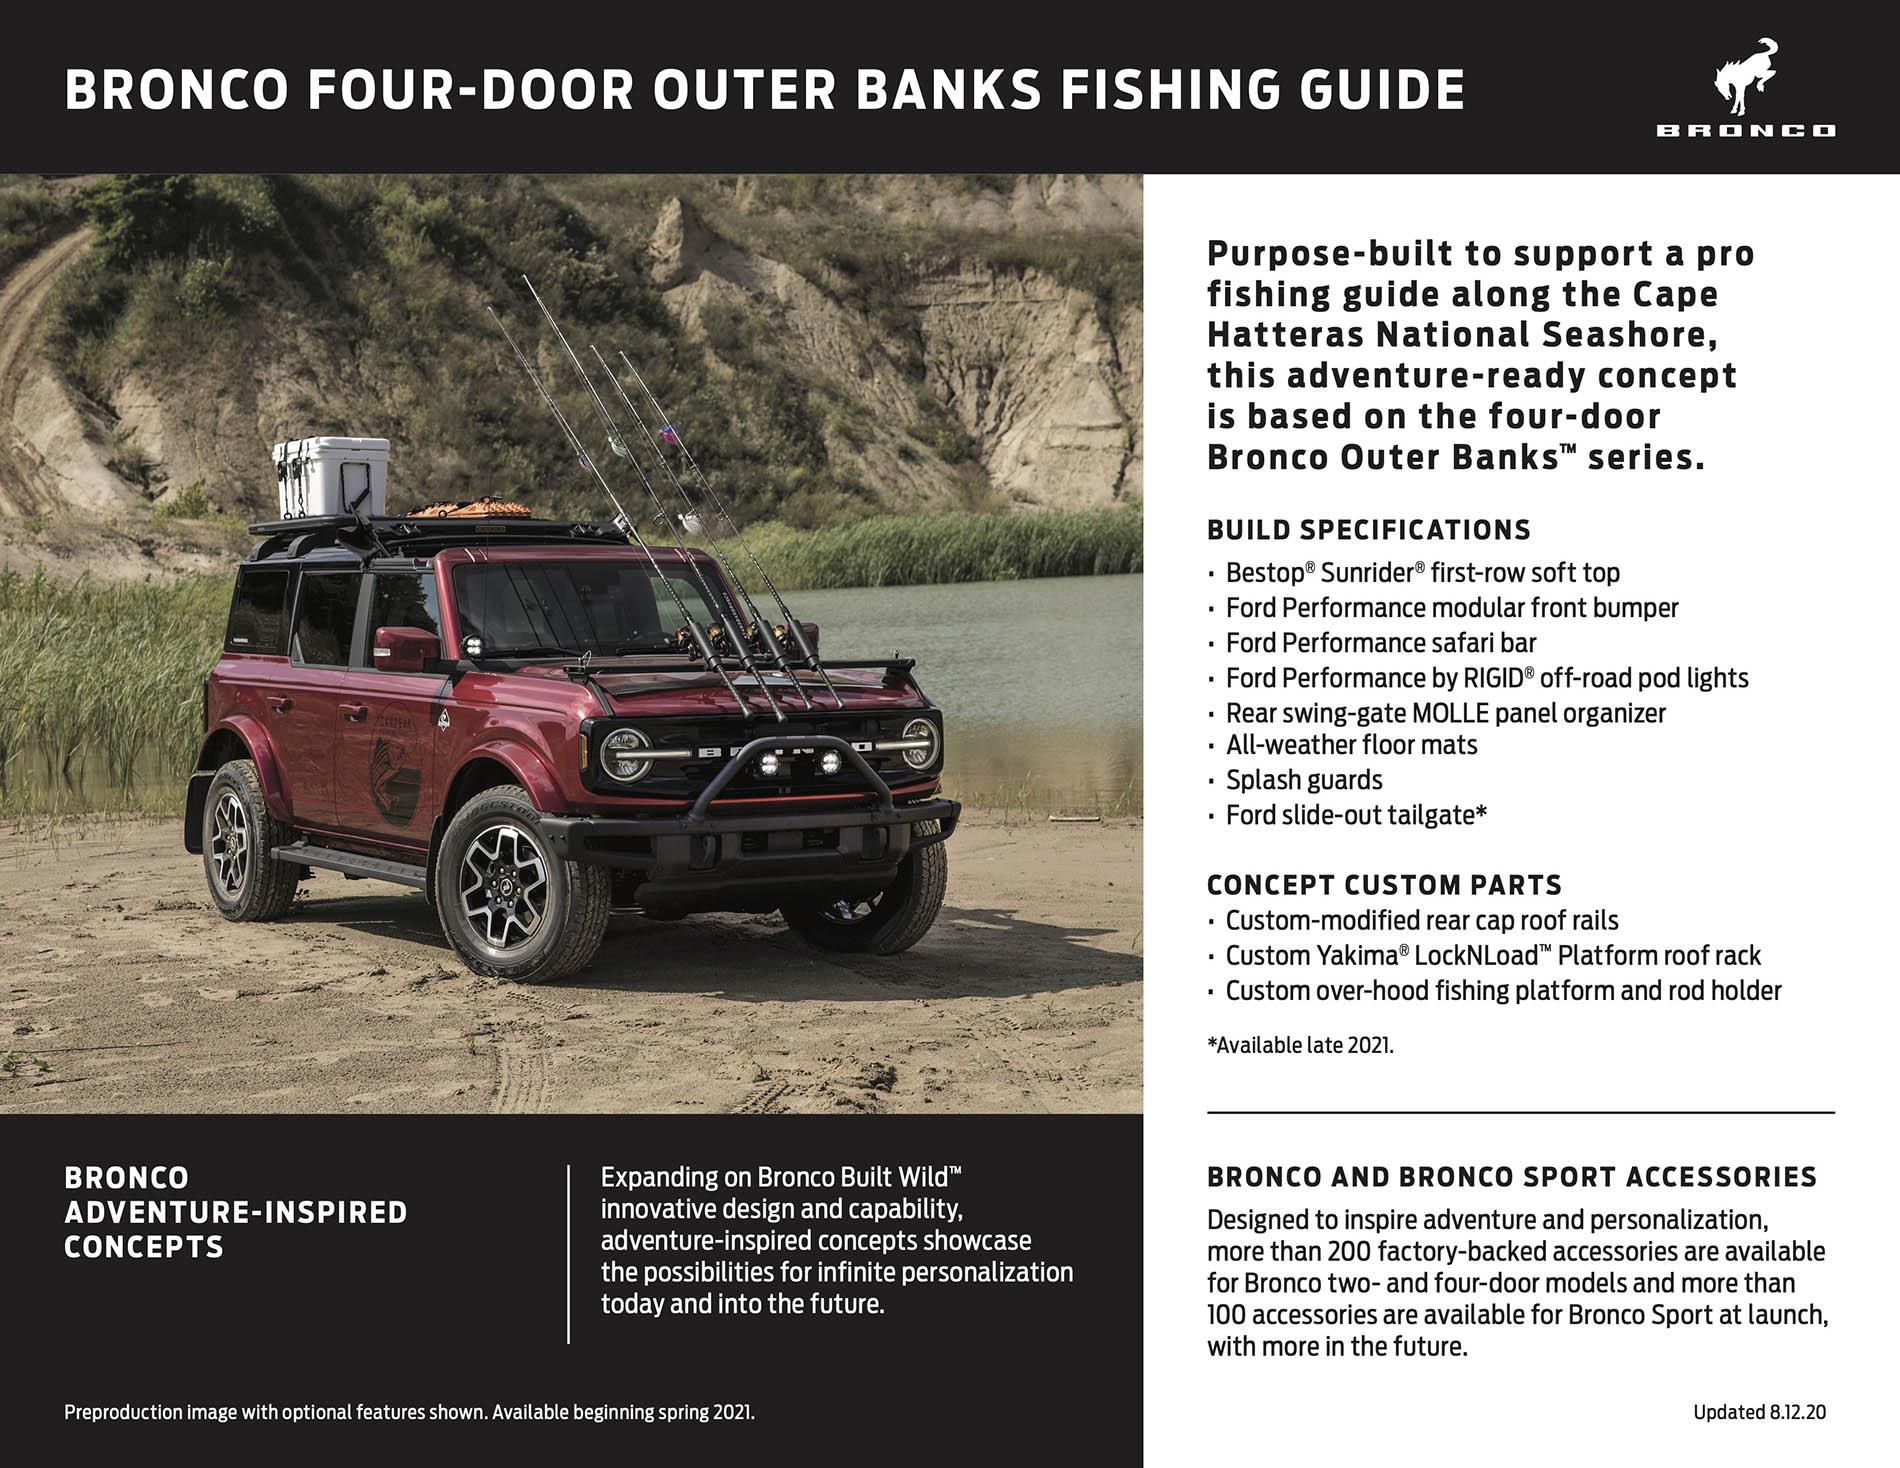 Ford Bronco With news that the 4 door pullout tray is late 2021. Its time for operation 2 door pullout tray 2021 Bronco Four Door Outer Banks Fishing Guide Concept Fact Sheet